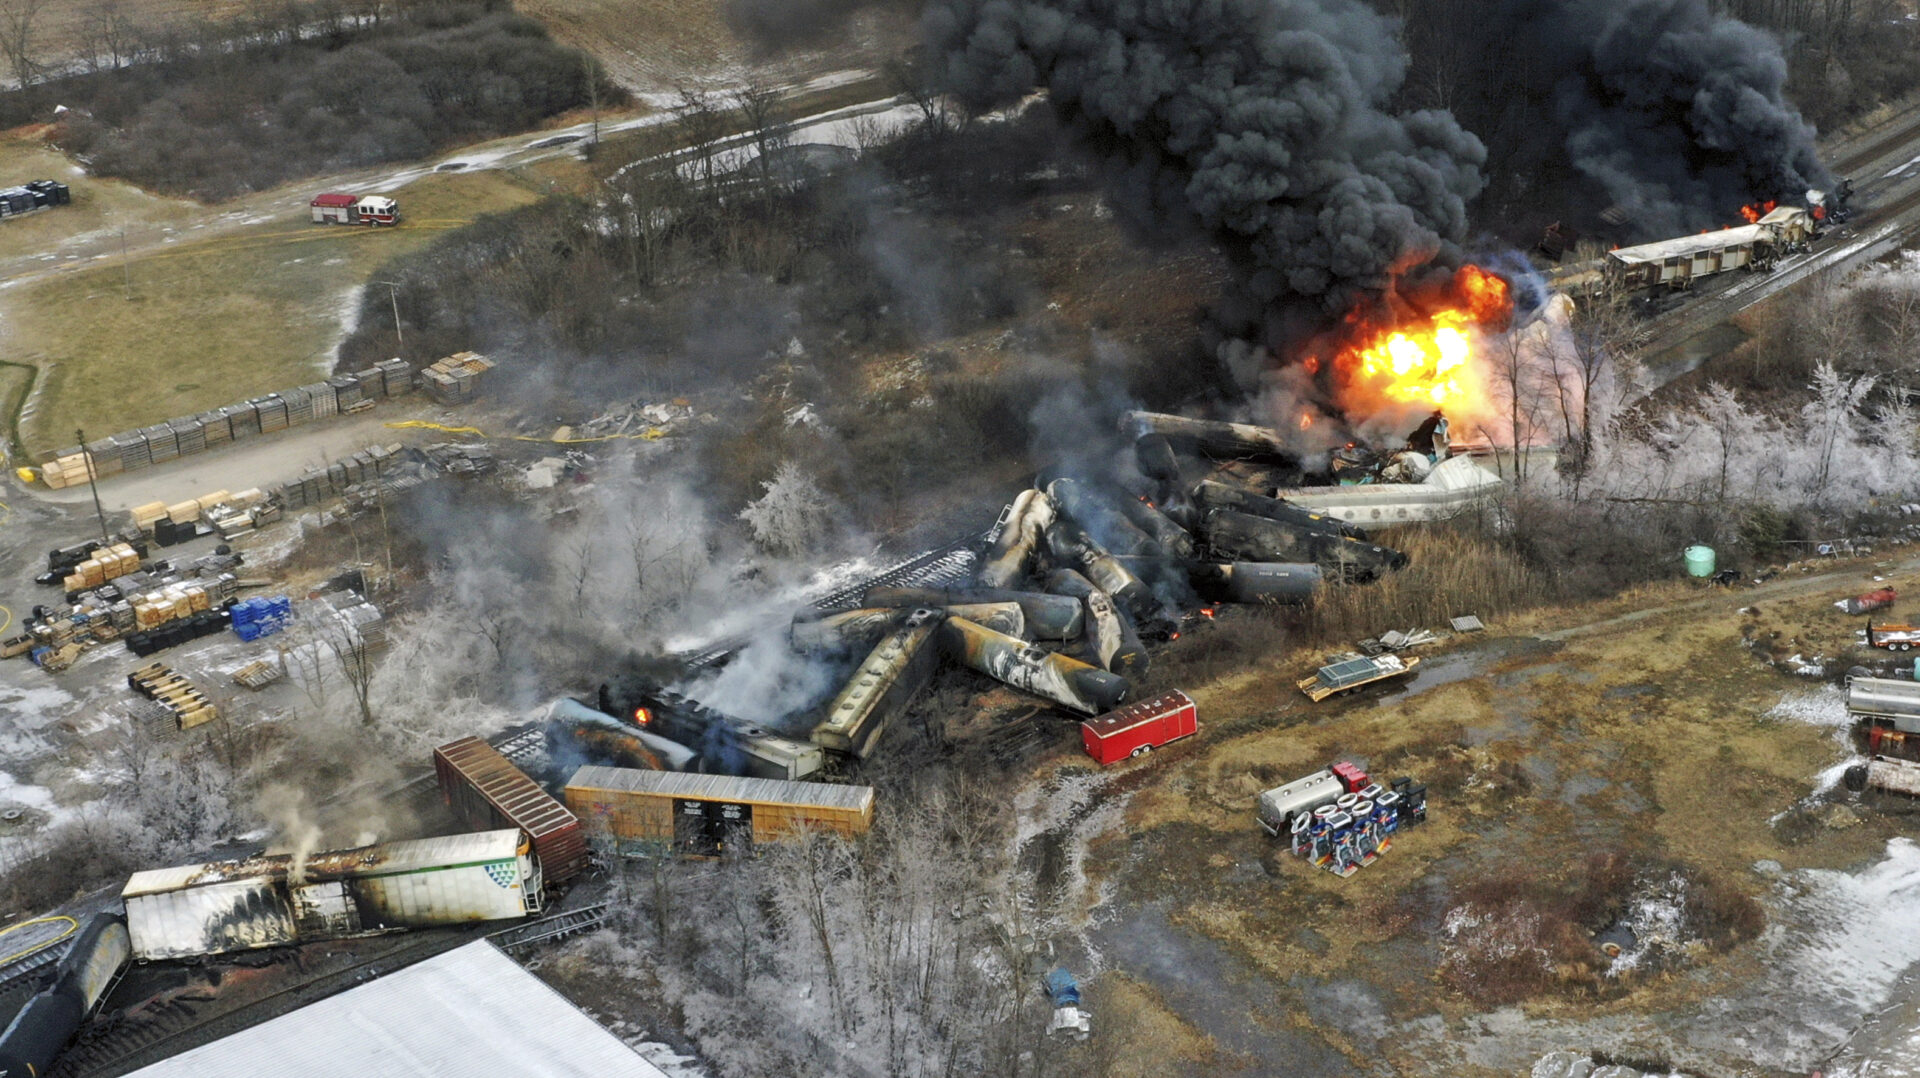 FILE - In this photo taken with a drone, portions of a Norfolk Southern freight train that derailed the previous night in East Palestine, Ohio, remain on fire at mid-day on Feb. 4, 2023. Transportation Secretary Pete Buttigieg announced a package of reforms to improve safety Tuesday, Feb. 21 — two days after he warned the railroad responsible for the derailment, Norfolk Southern, to fulfill its promises to clean up the mess just outside East Palestine, and help the town recover.